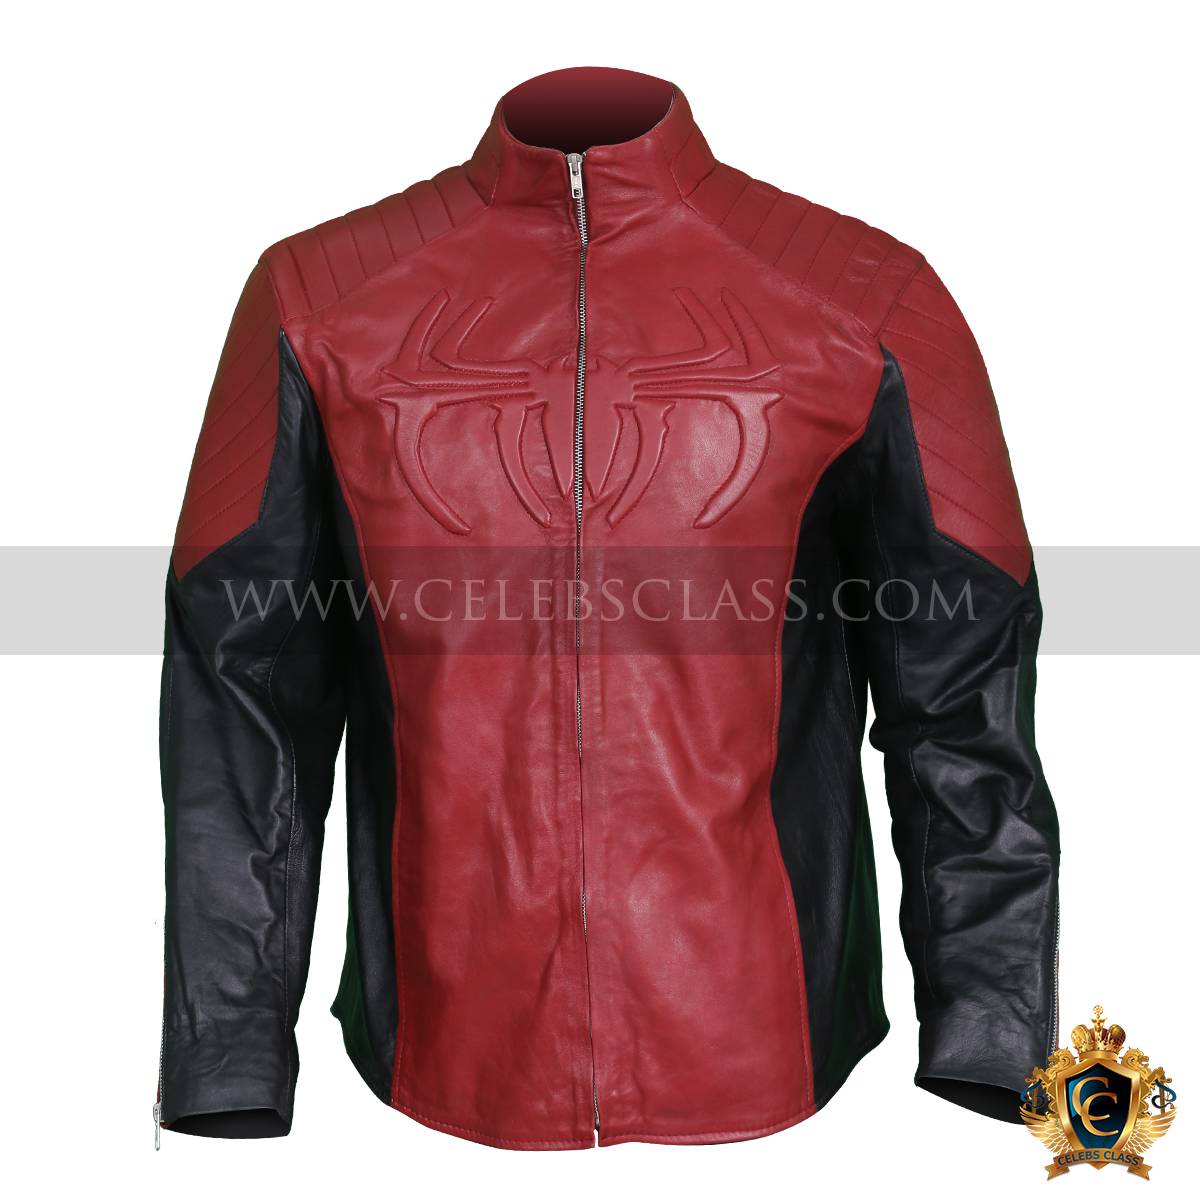 Man in Red Jacket Logo - Spider Man Red And Black Jacket. Movie Leather Jackets